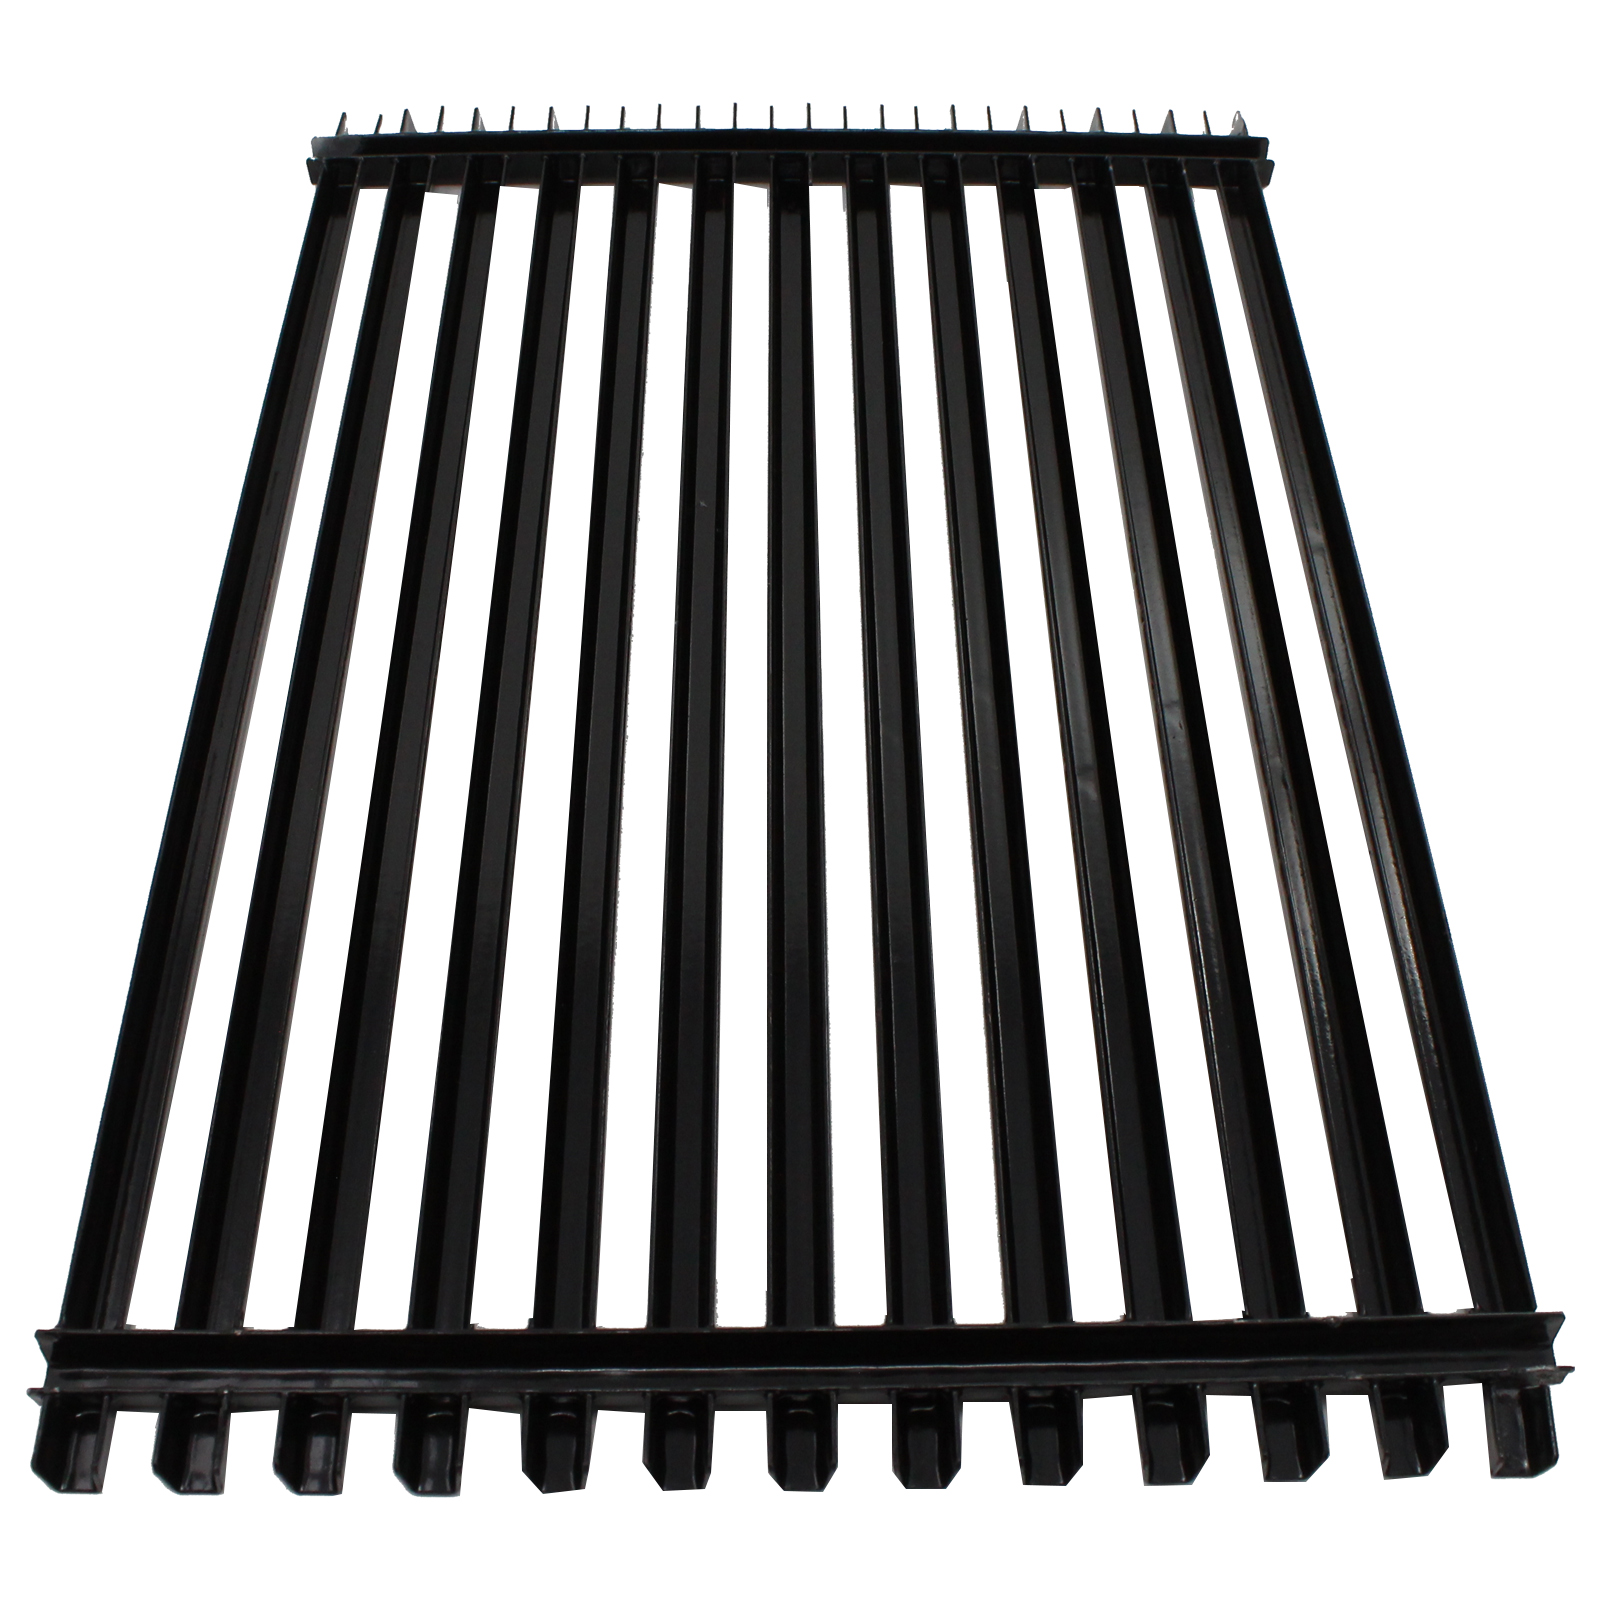 BBQ Grill Cooking Grates Replacement Parts for Kalamazoo Pedestal - Compatible Barbeque Porcelain Coated Steel Grid 17 3/4" - image 4 of 4